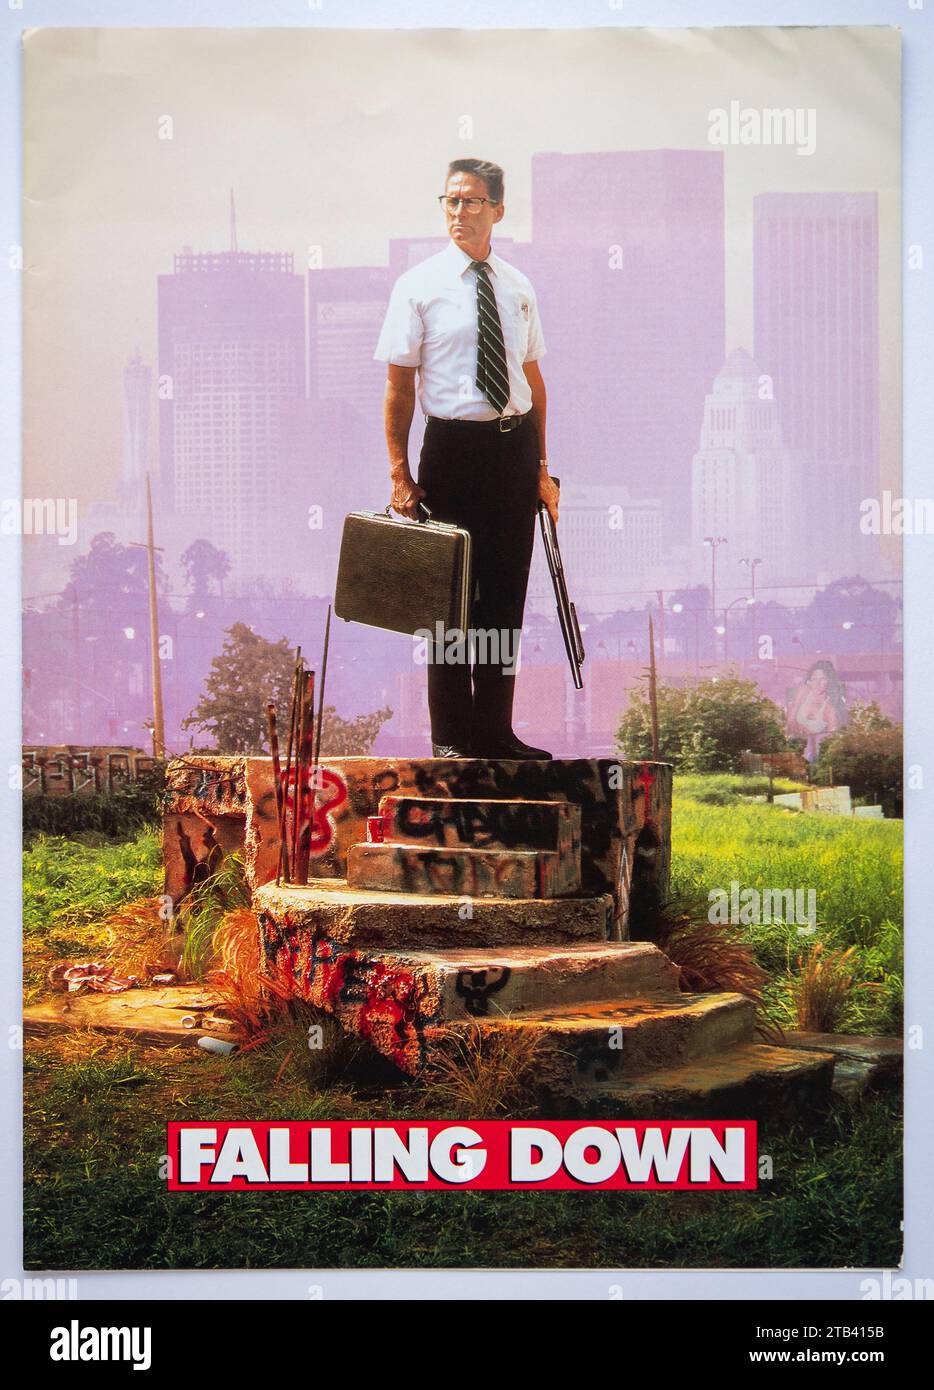 Front cover of publicity information for the movie Falling Down, a psychological thriller starring Michael Douglas, which was released in 1993 Stock Photo